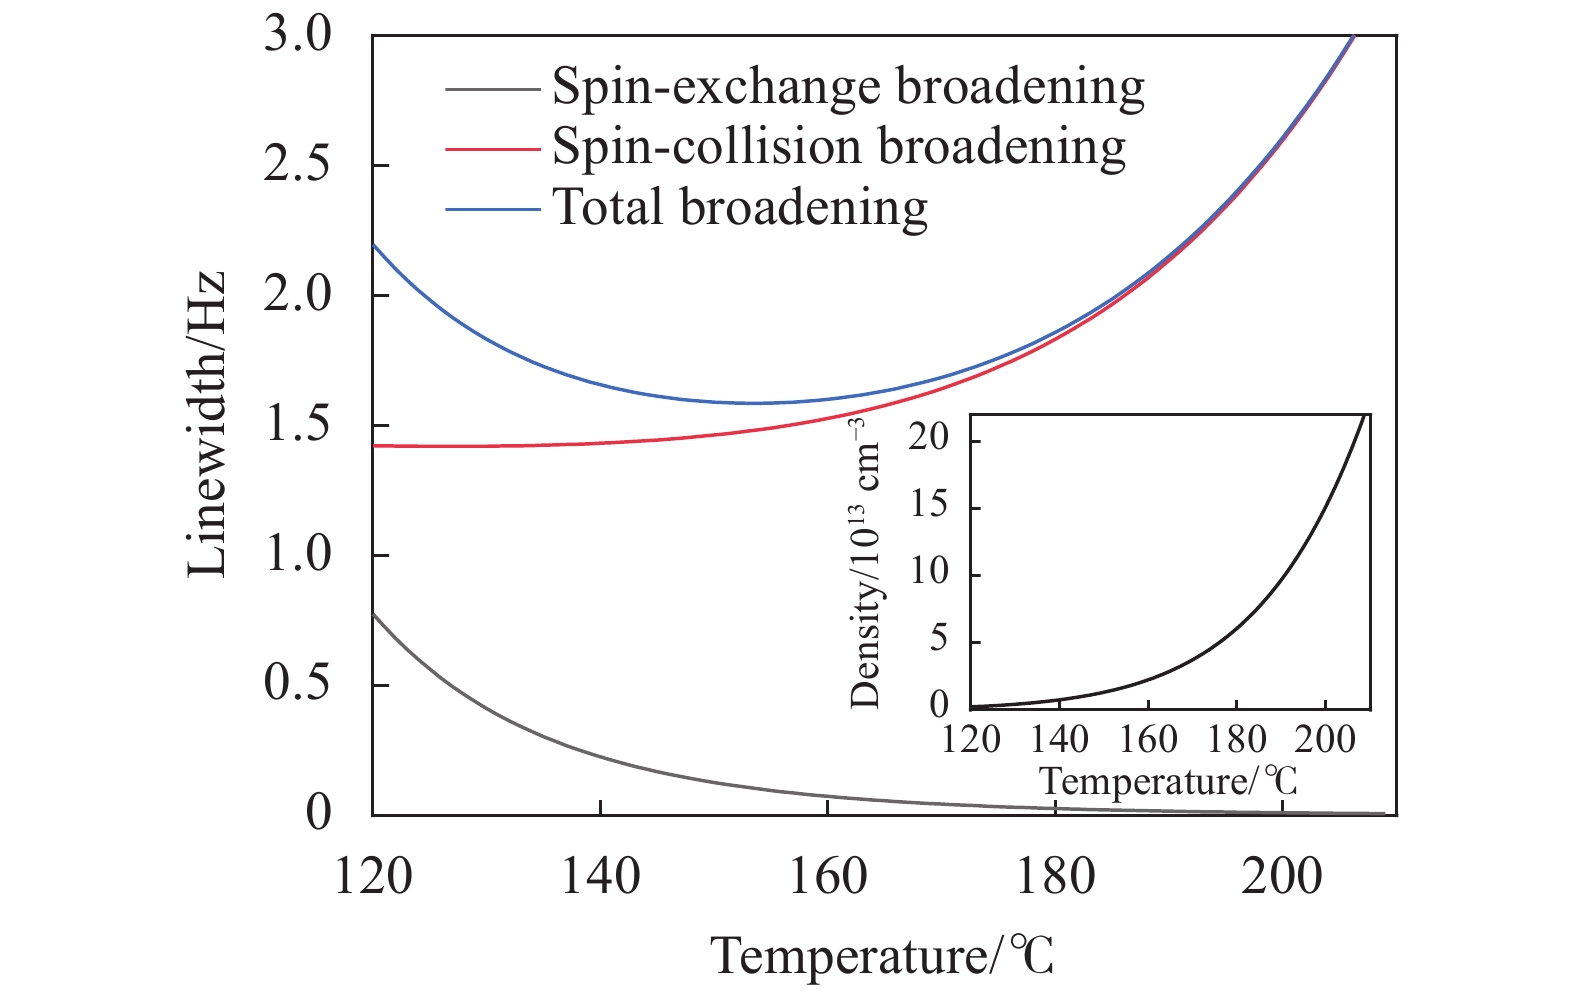 Resonance spectrum linewidth features under the cell temperature varying from 120 °C to 210 °C